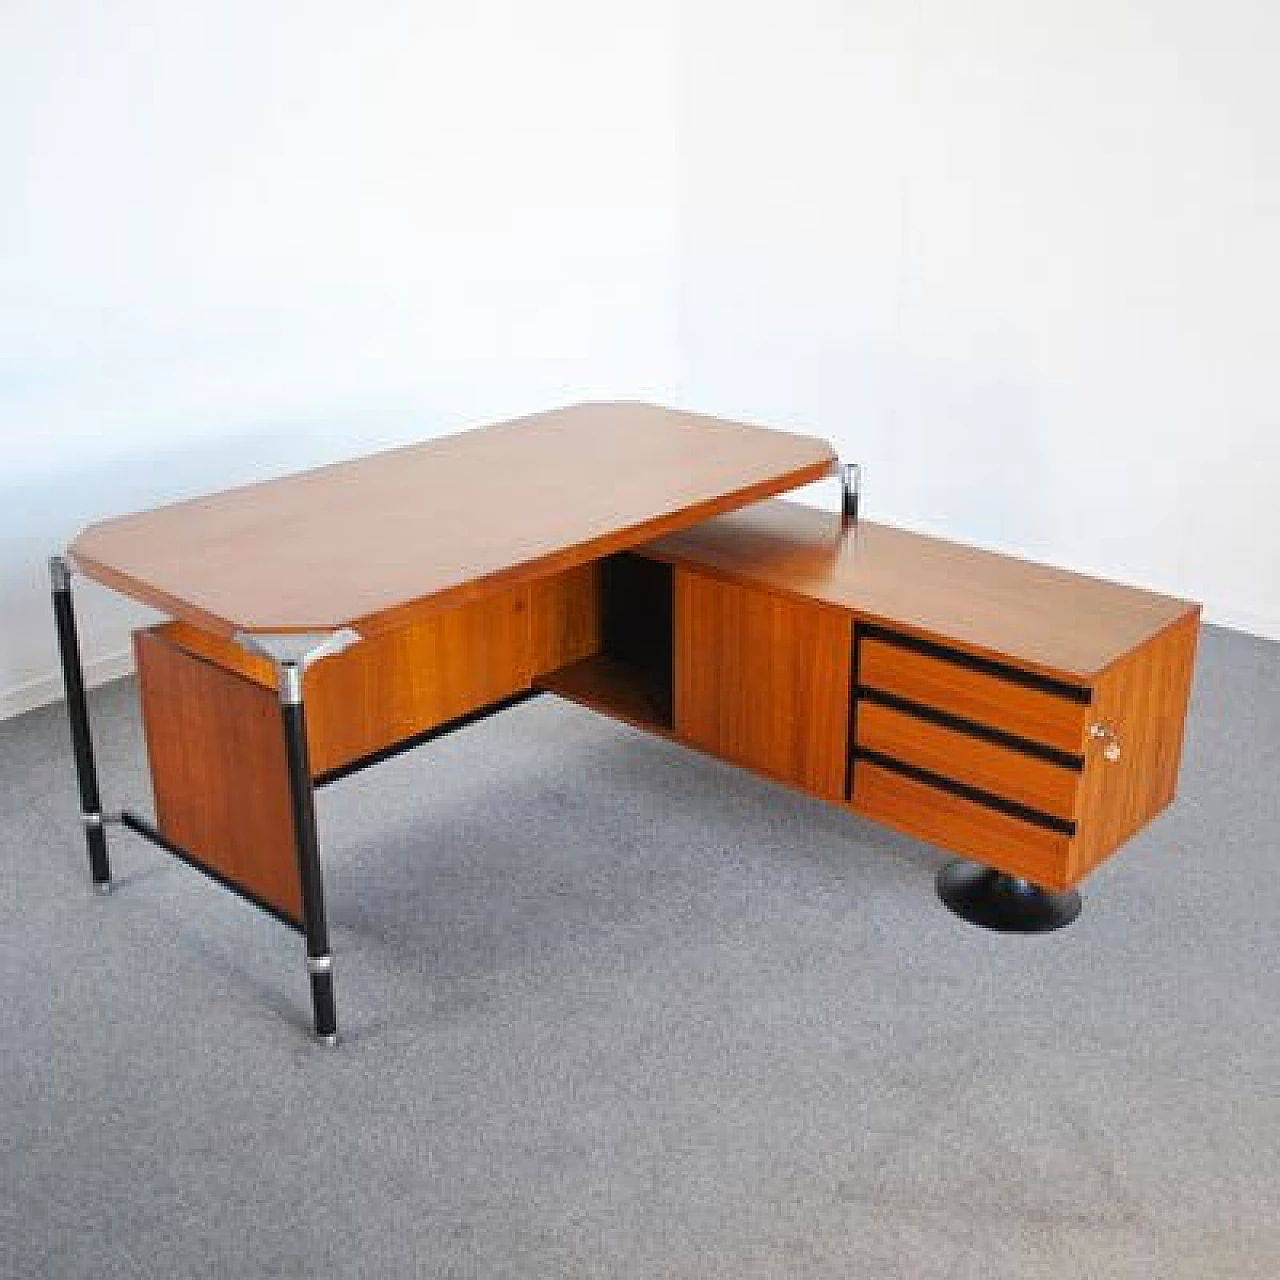 Executive desk by Ico Parisi for MIM Rome, 1950s 1412234